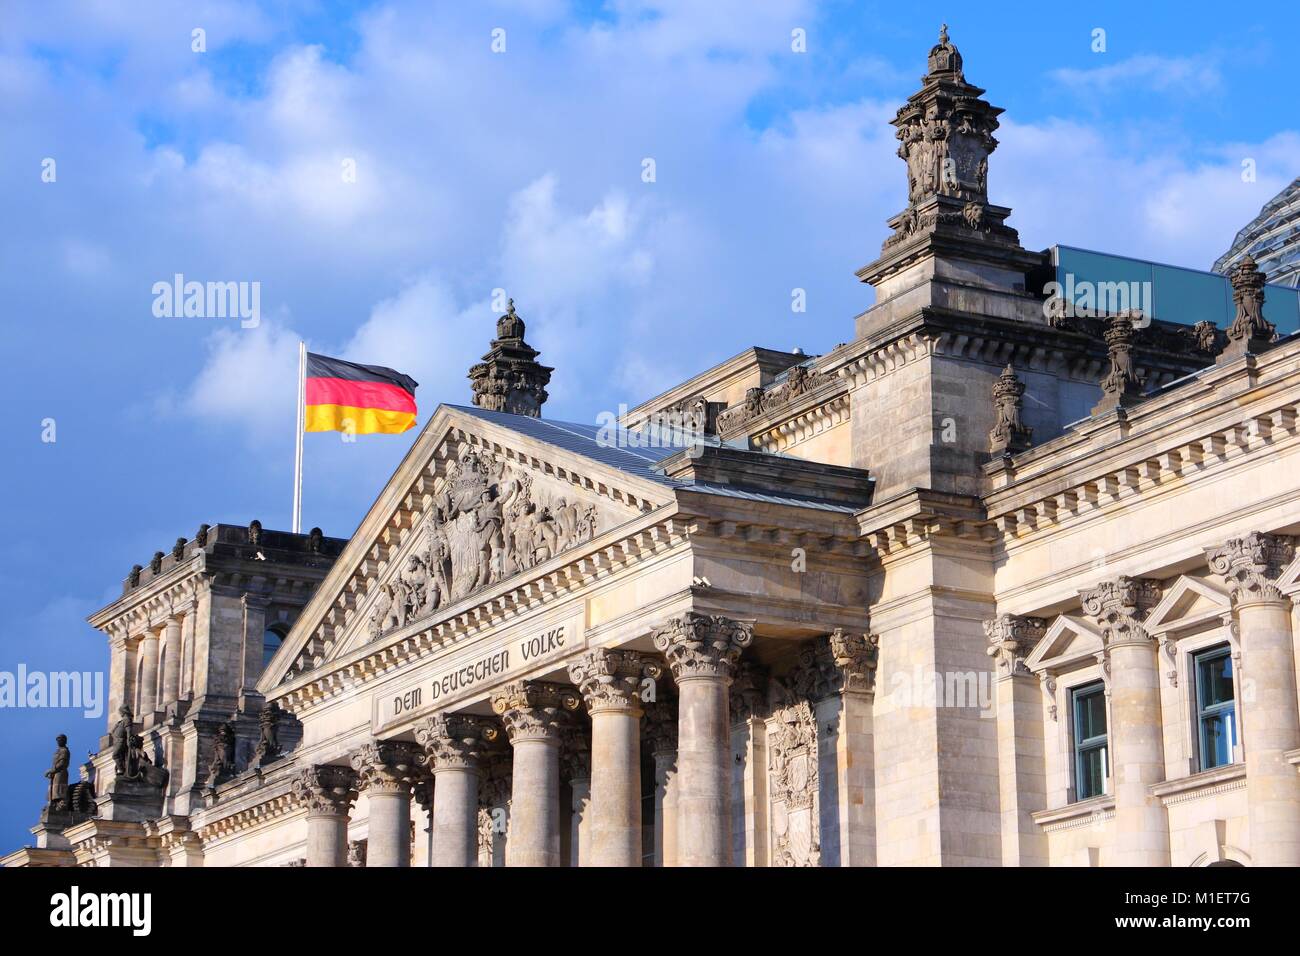 Reichstag building, German parliament house. Berlin, Germany. Stock Photo